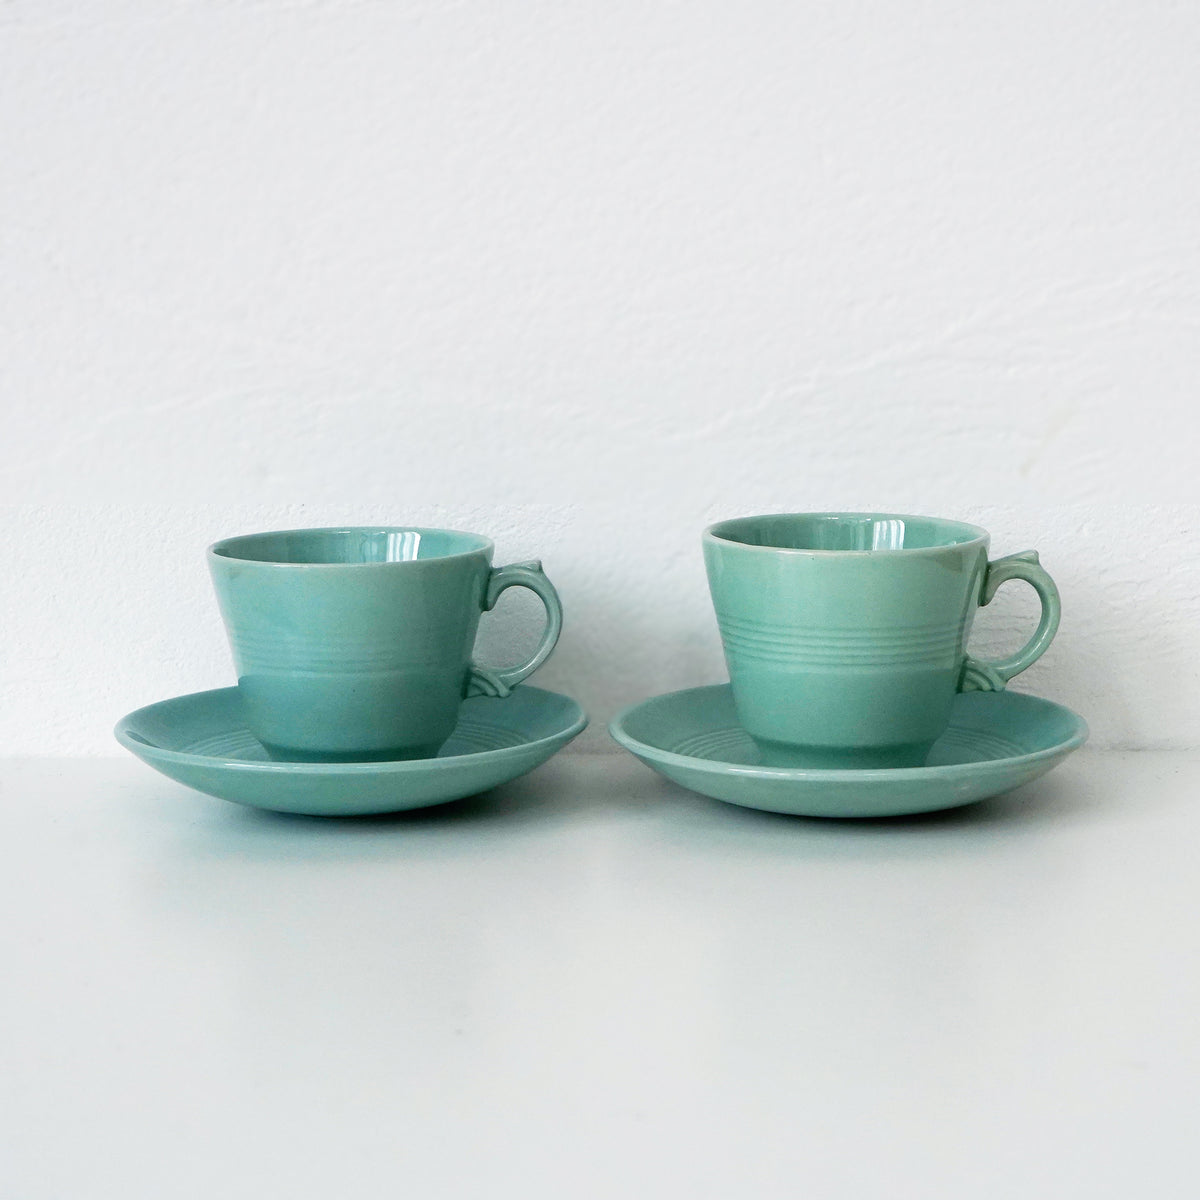 Vintage Wood's Ware Cup & Saucer / 英国製 ウッズウェア エスプレッソカップ＆ソーサー2客セット